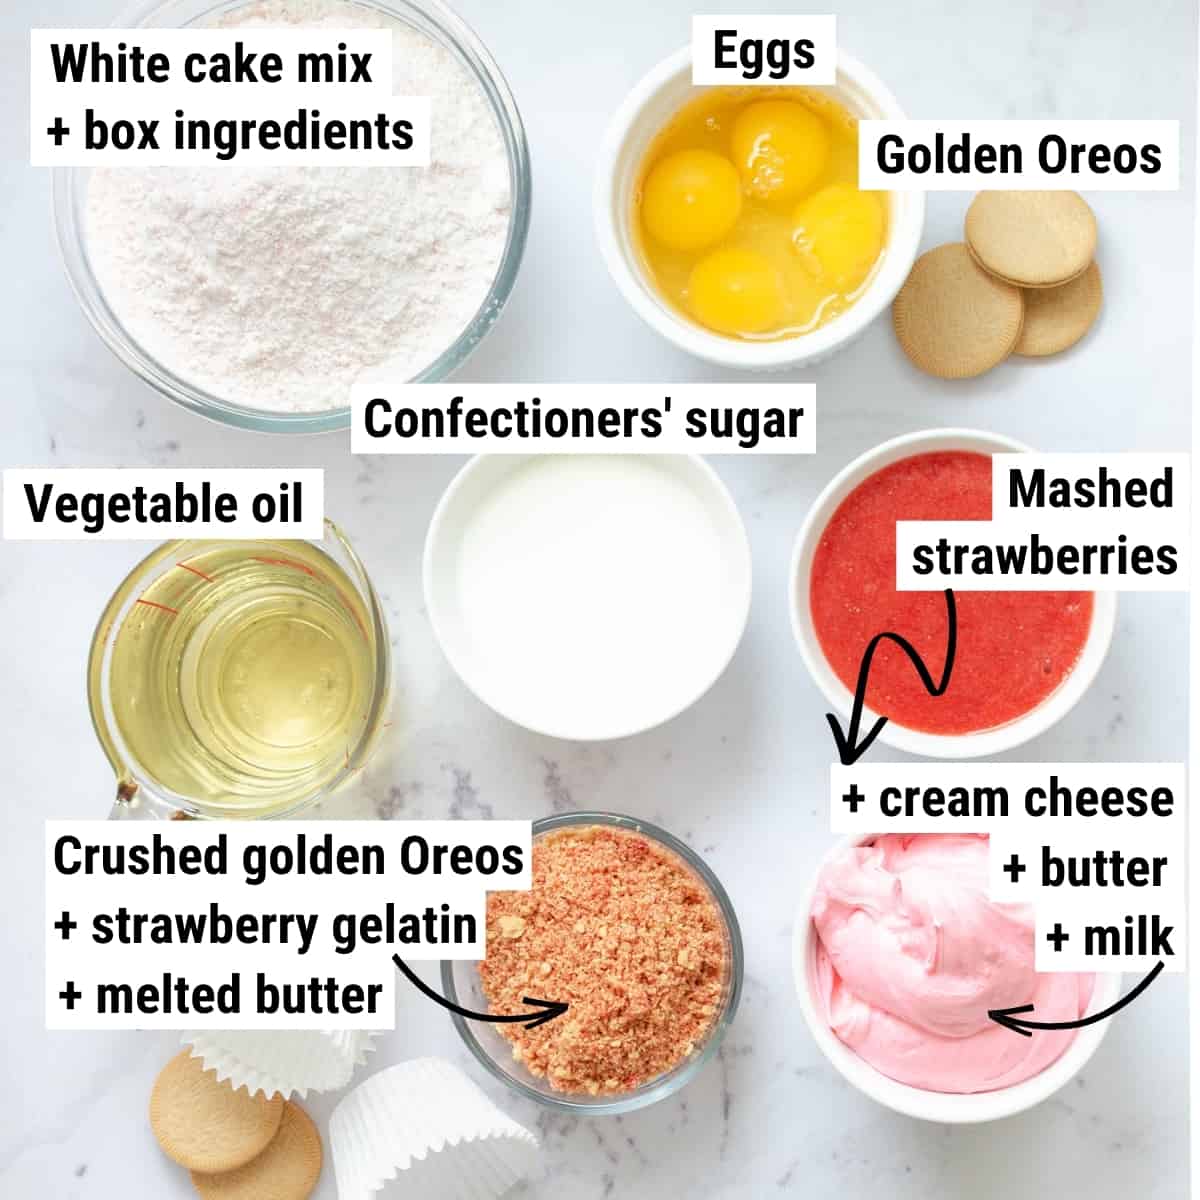 The ingredients to make strawberry crunch cupcakes.